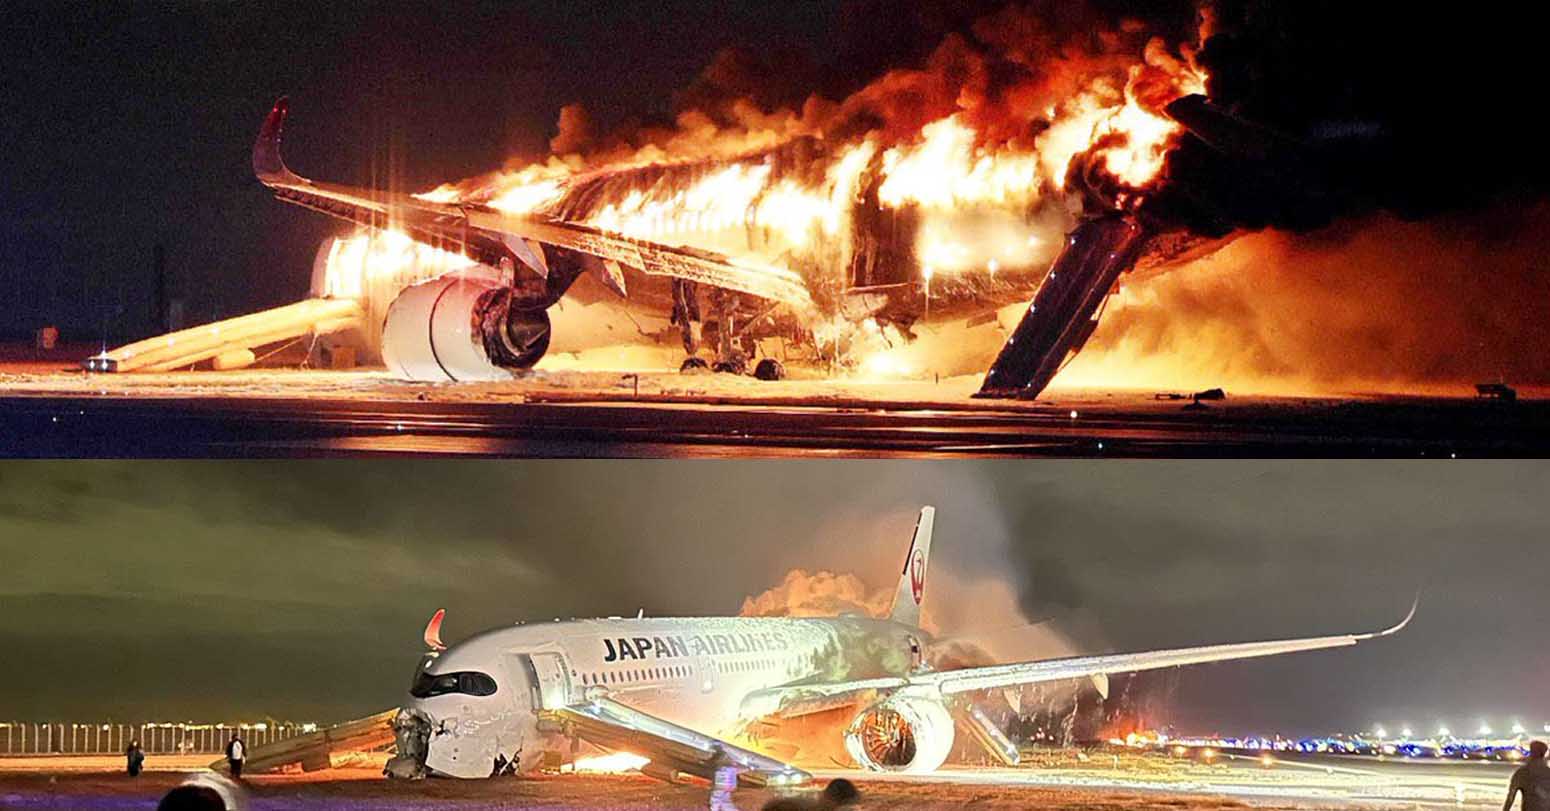 5 Killed In Plane Collision At Japan Airport